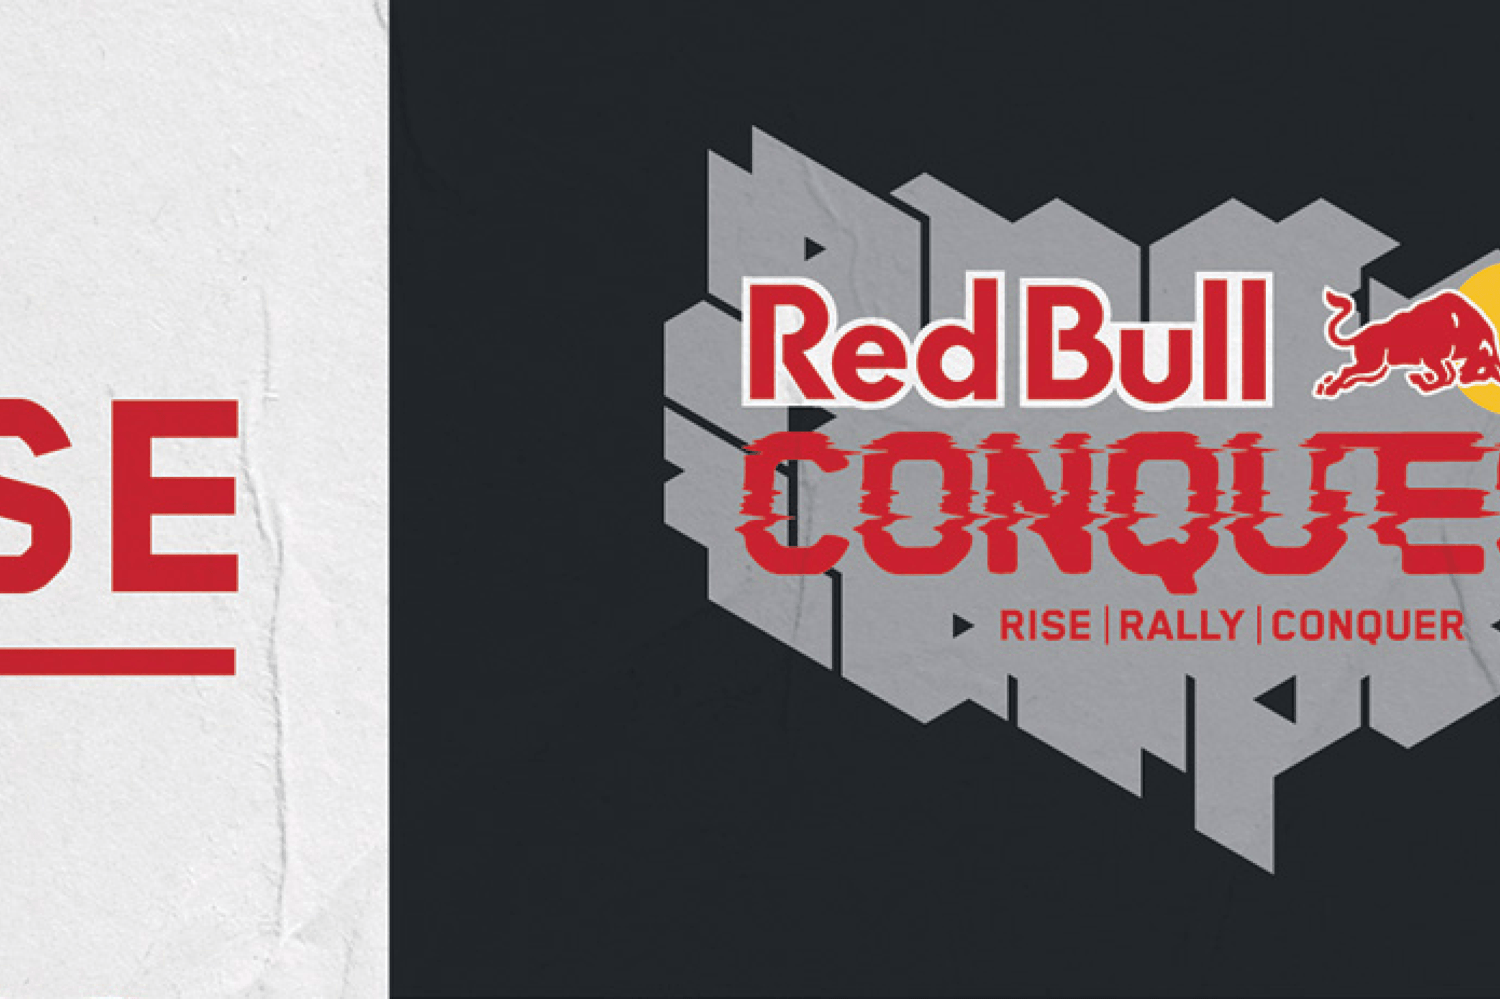 Gray and Red Bulls Logo - Get Ready for Red Bull Conquest, an FGC Event Series